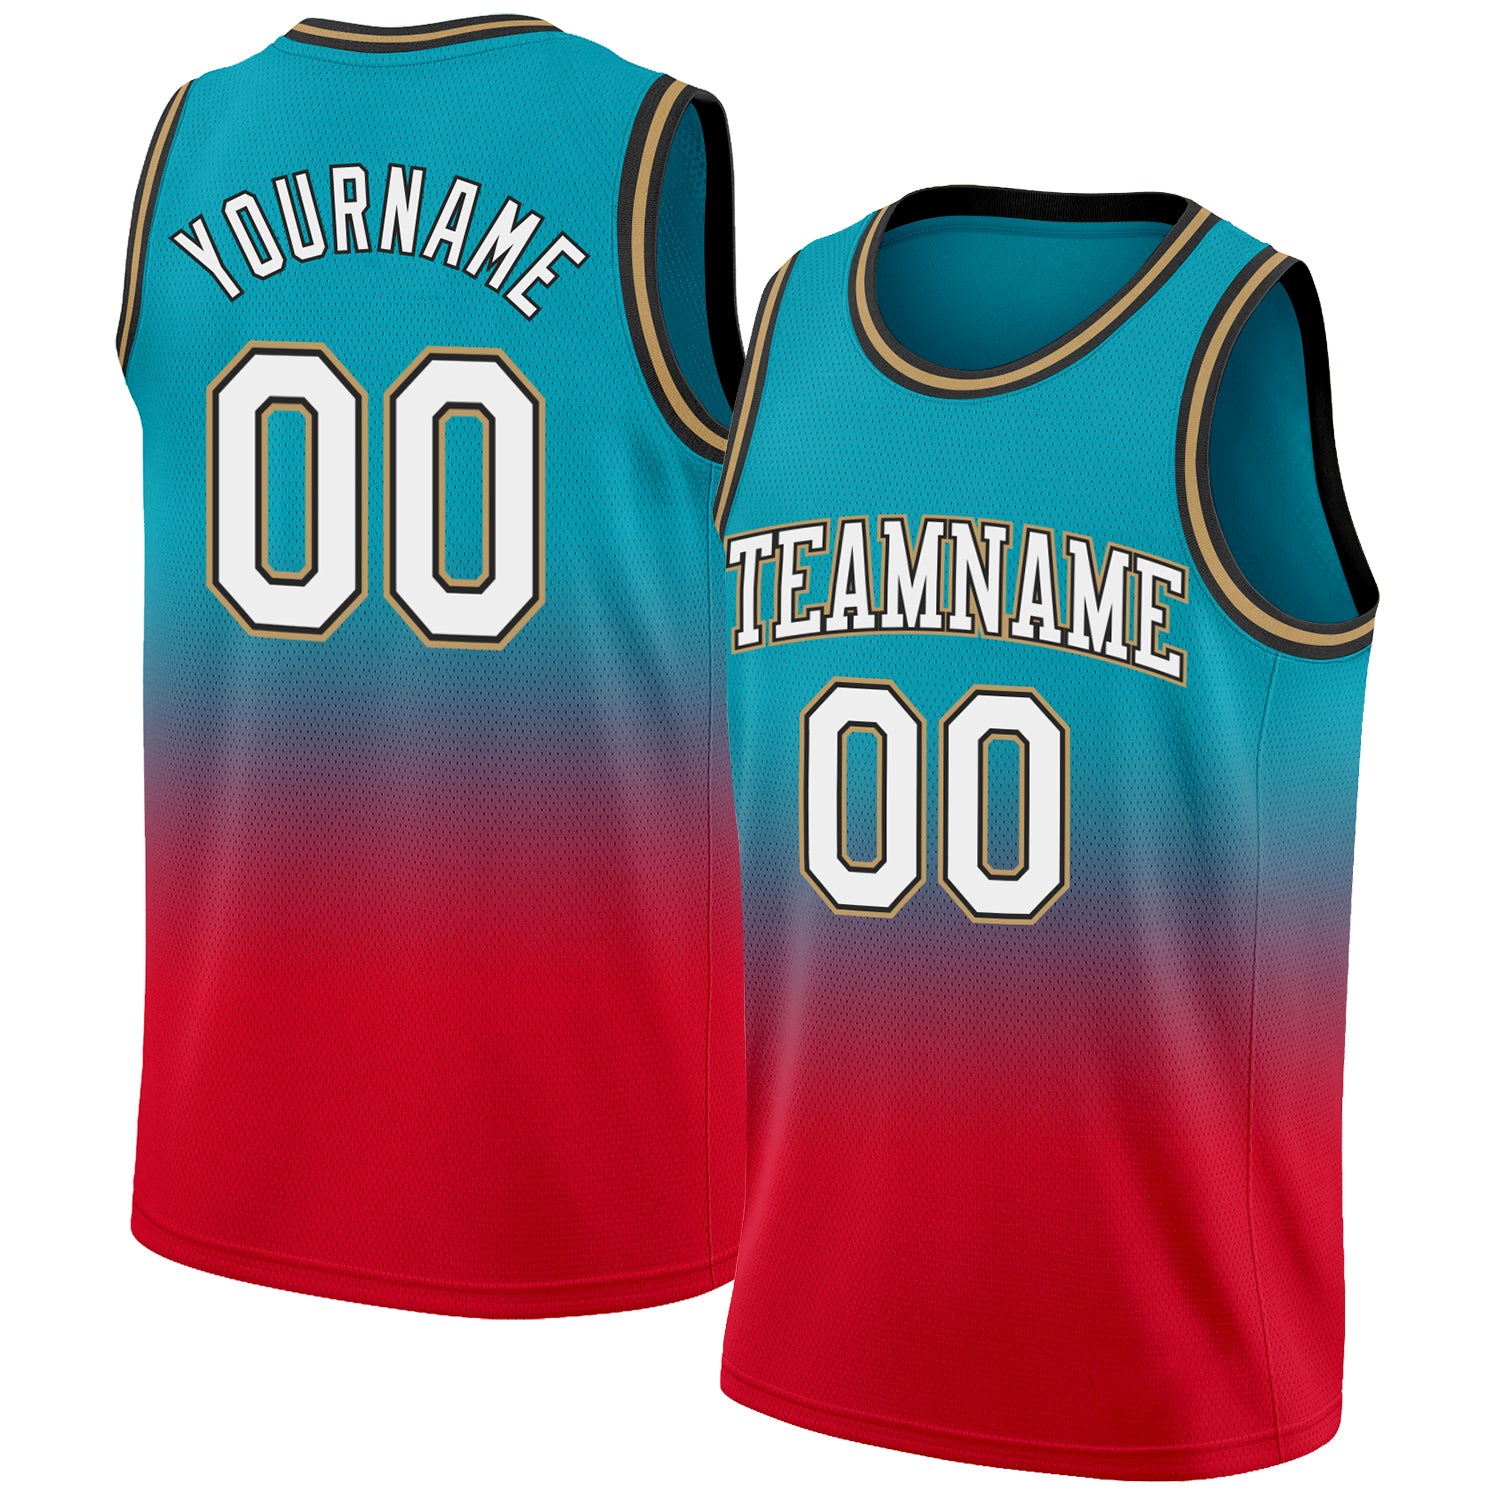 Custom Teal White-Red Authentic Fade Fashion Basketball Jersey